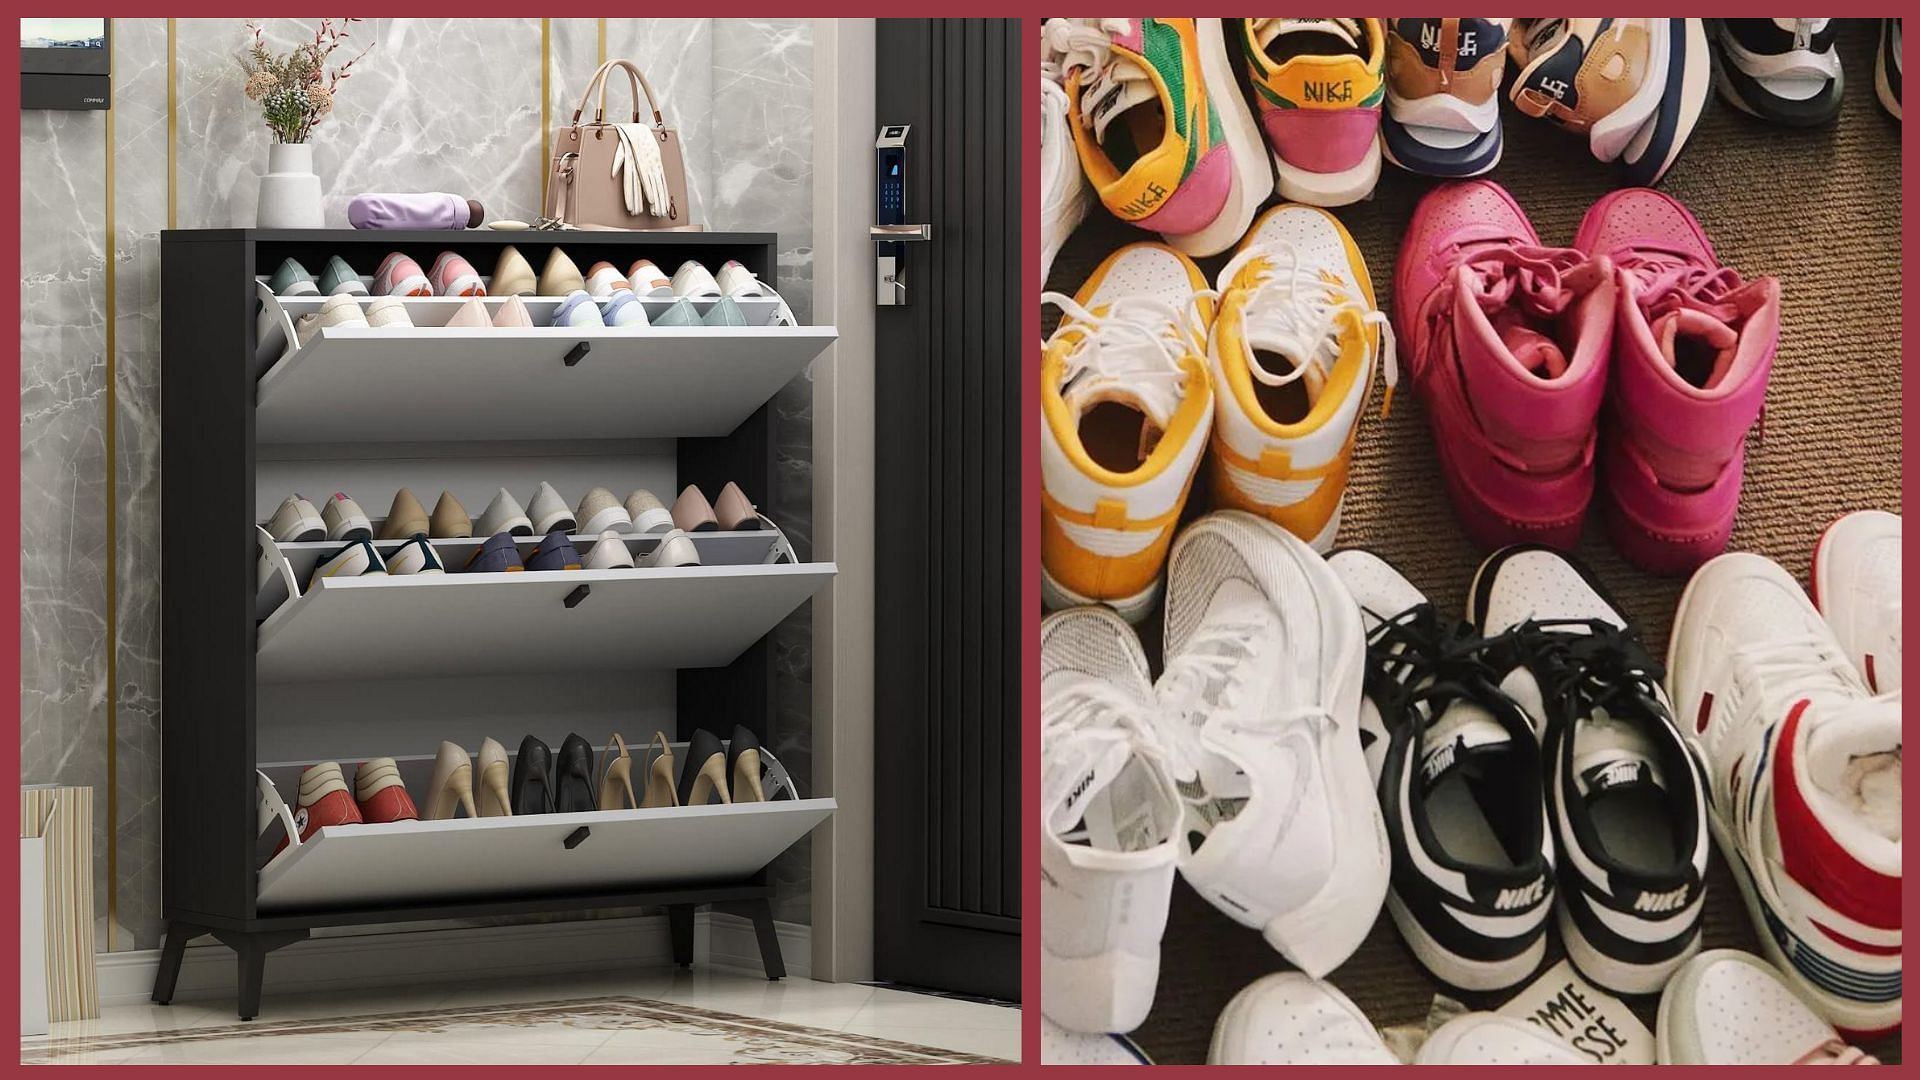 You can use shoe shelves and closet floor area to arrange your shoes properly (Image via Nike)